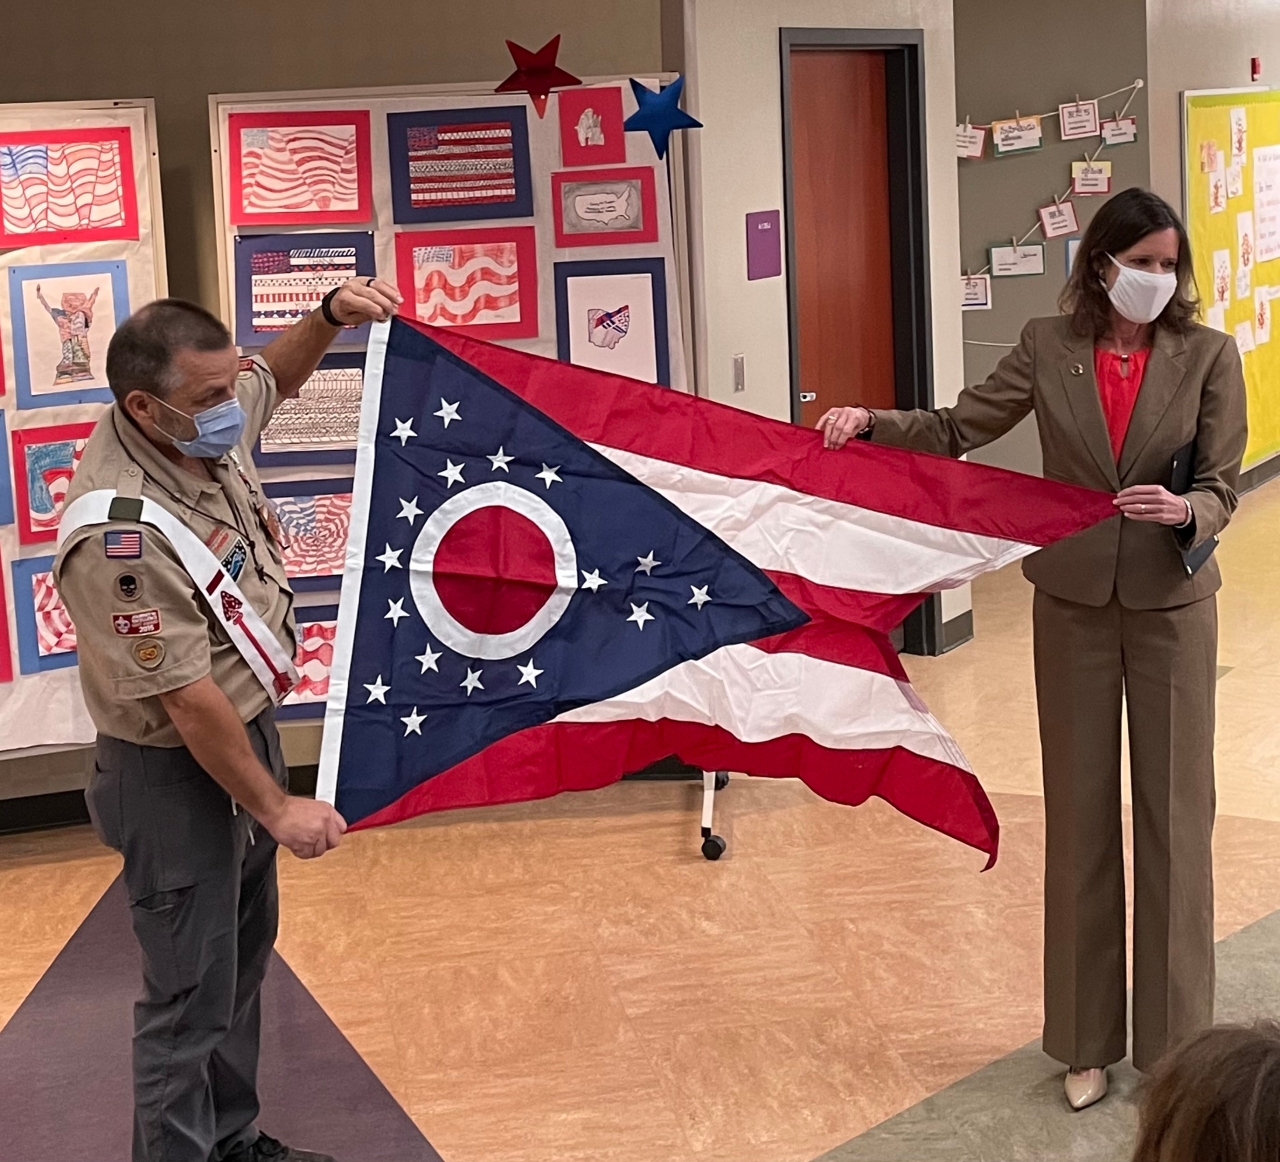 Representative Richardson presented an Ohio flag that was flown over the Statehouse to students and staff at Glacier Ridge Elementary School.